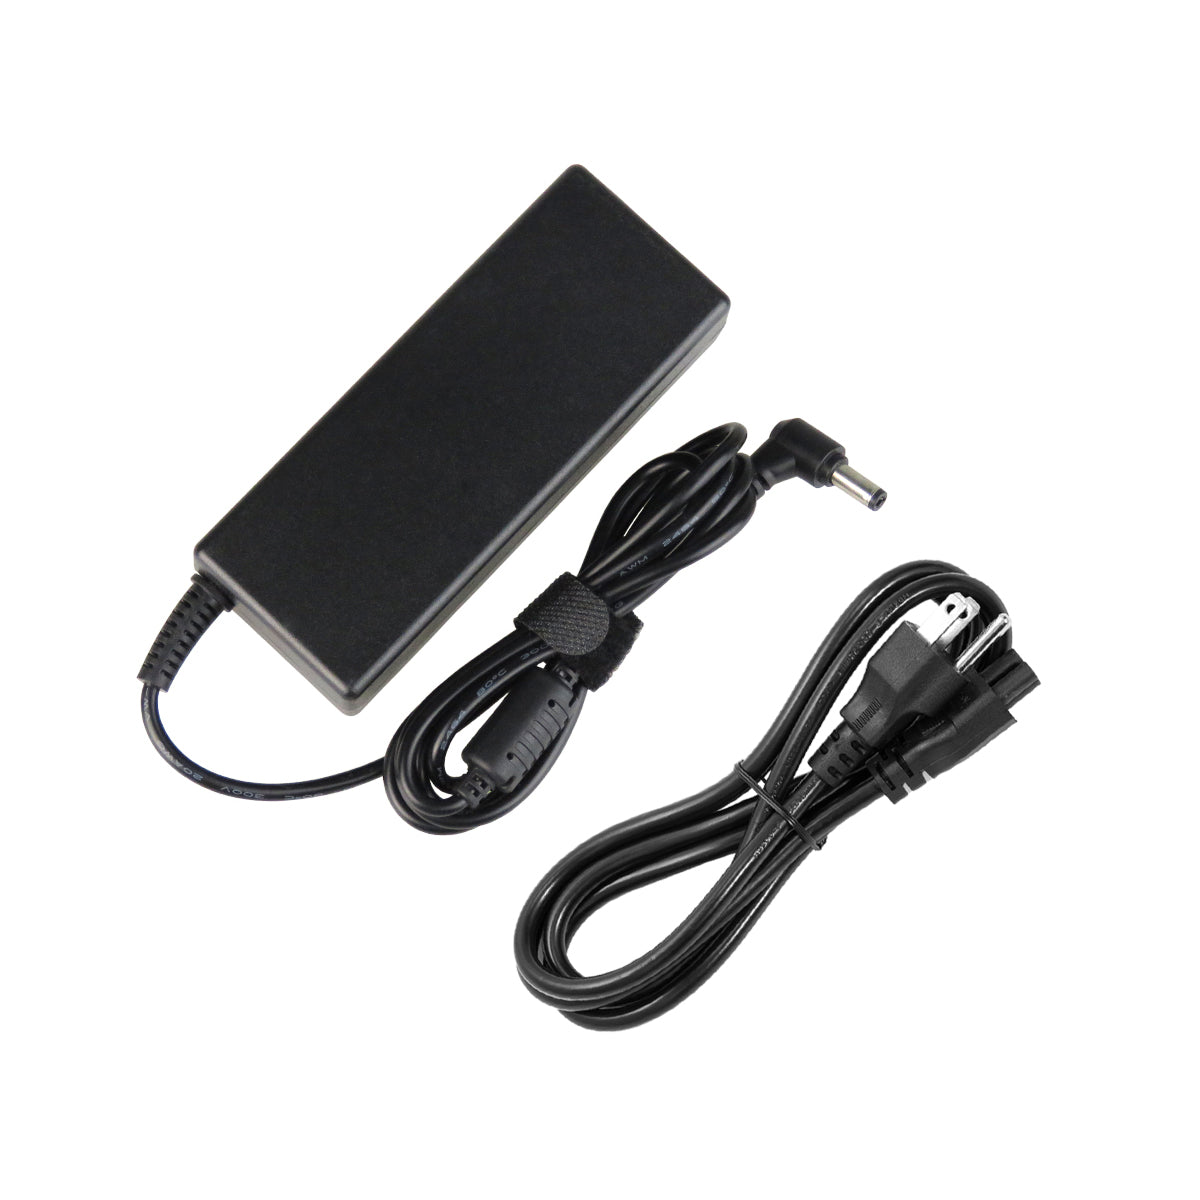 AC Adapter Charger for ASUS X56VR Notebook.